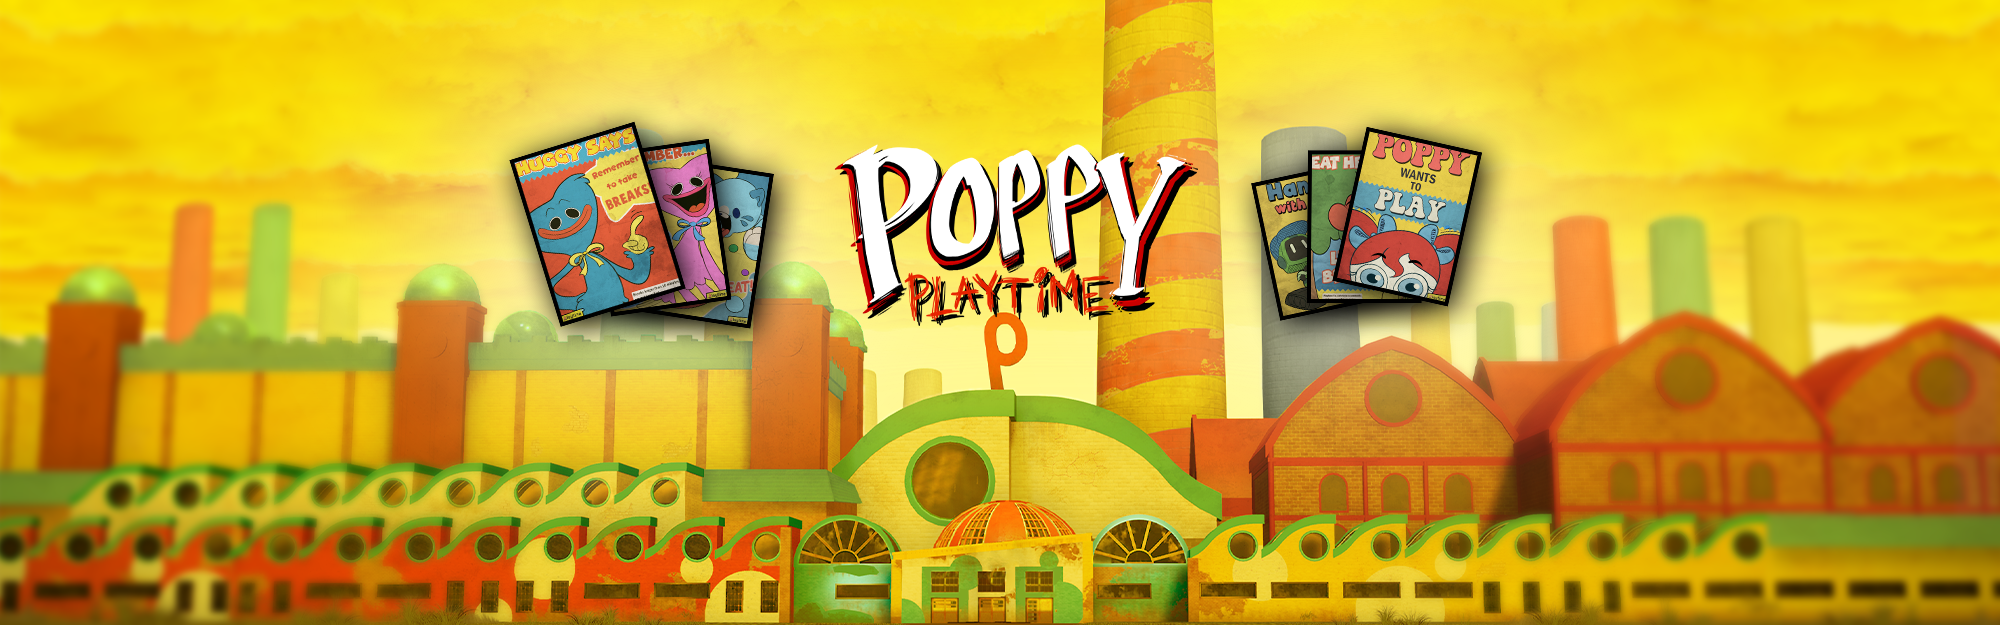 Poppy Playtime Marketplace  Sweet - NFT Digital Collectibles